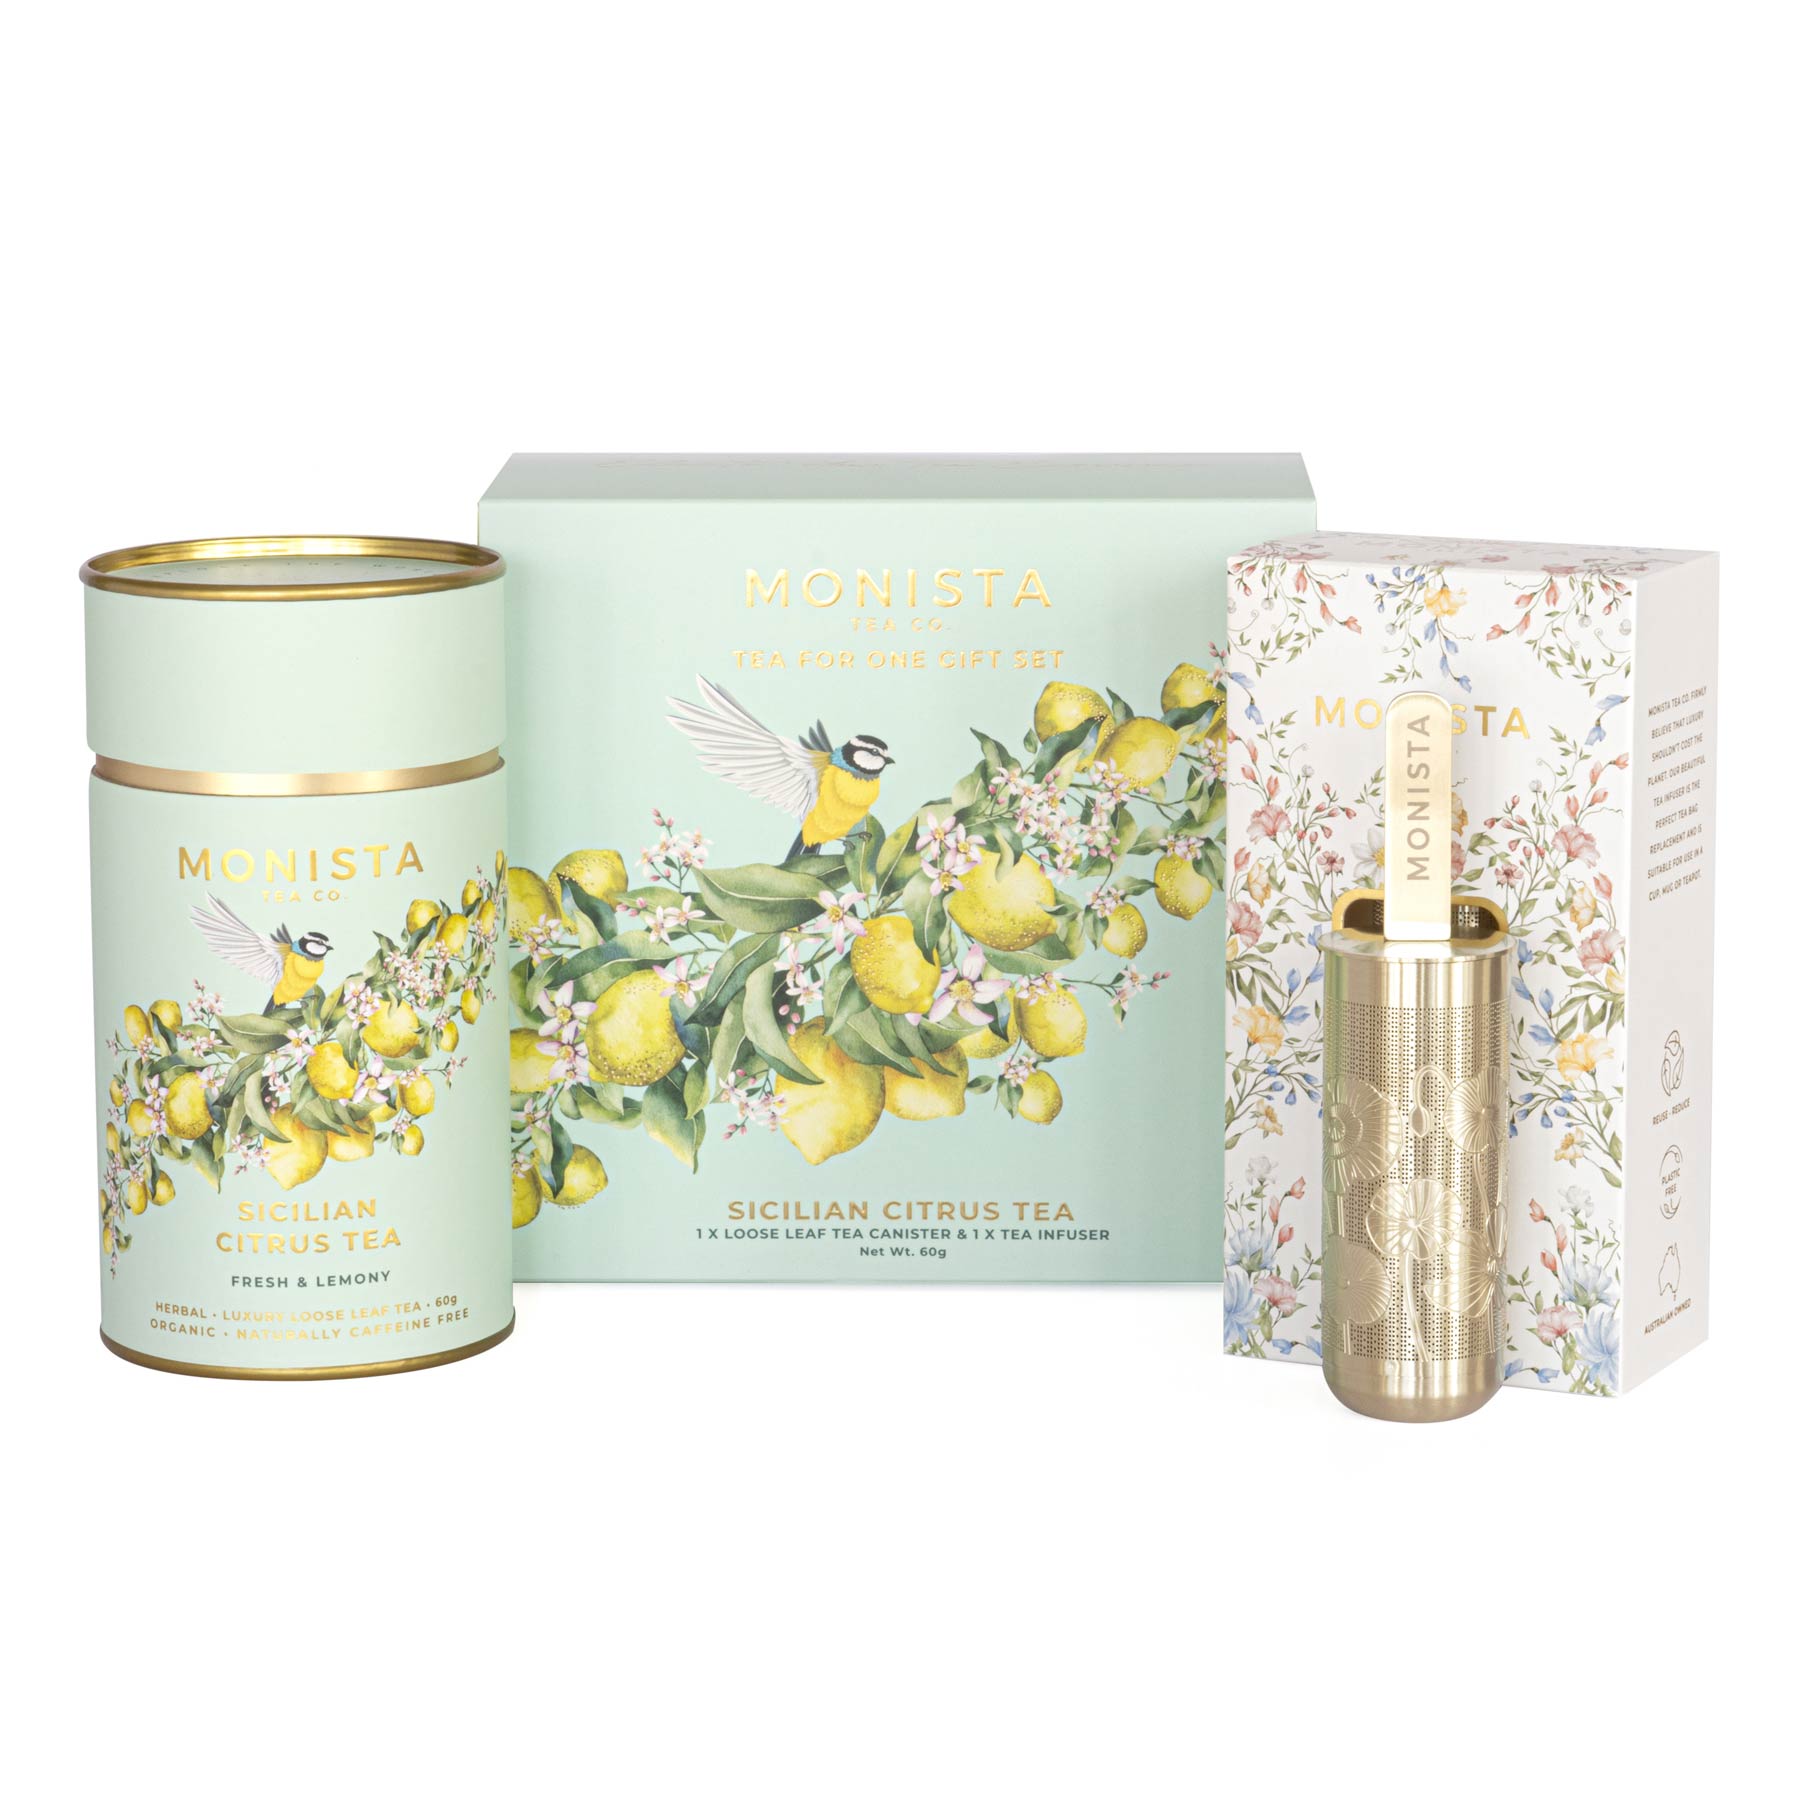 lemon tea gift set with tea canister and infuser